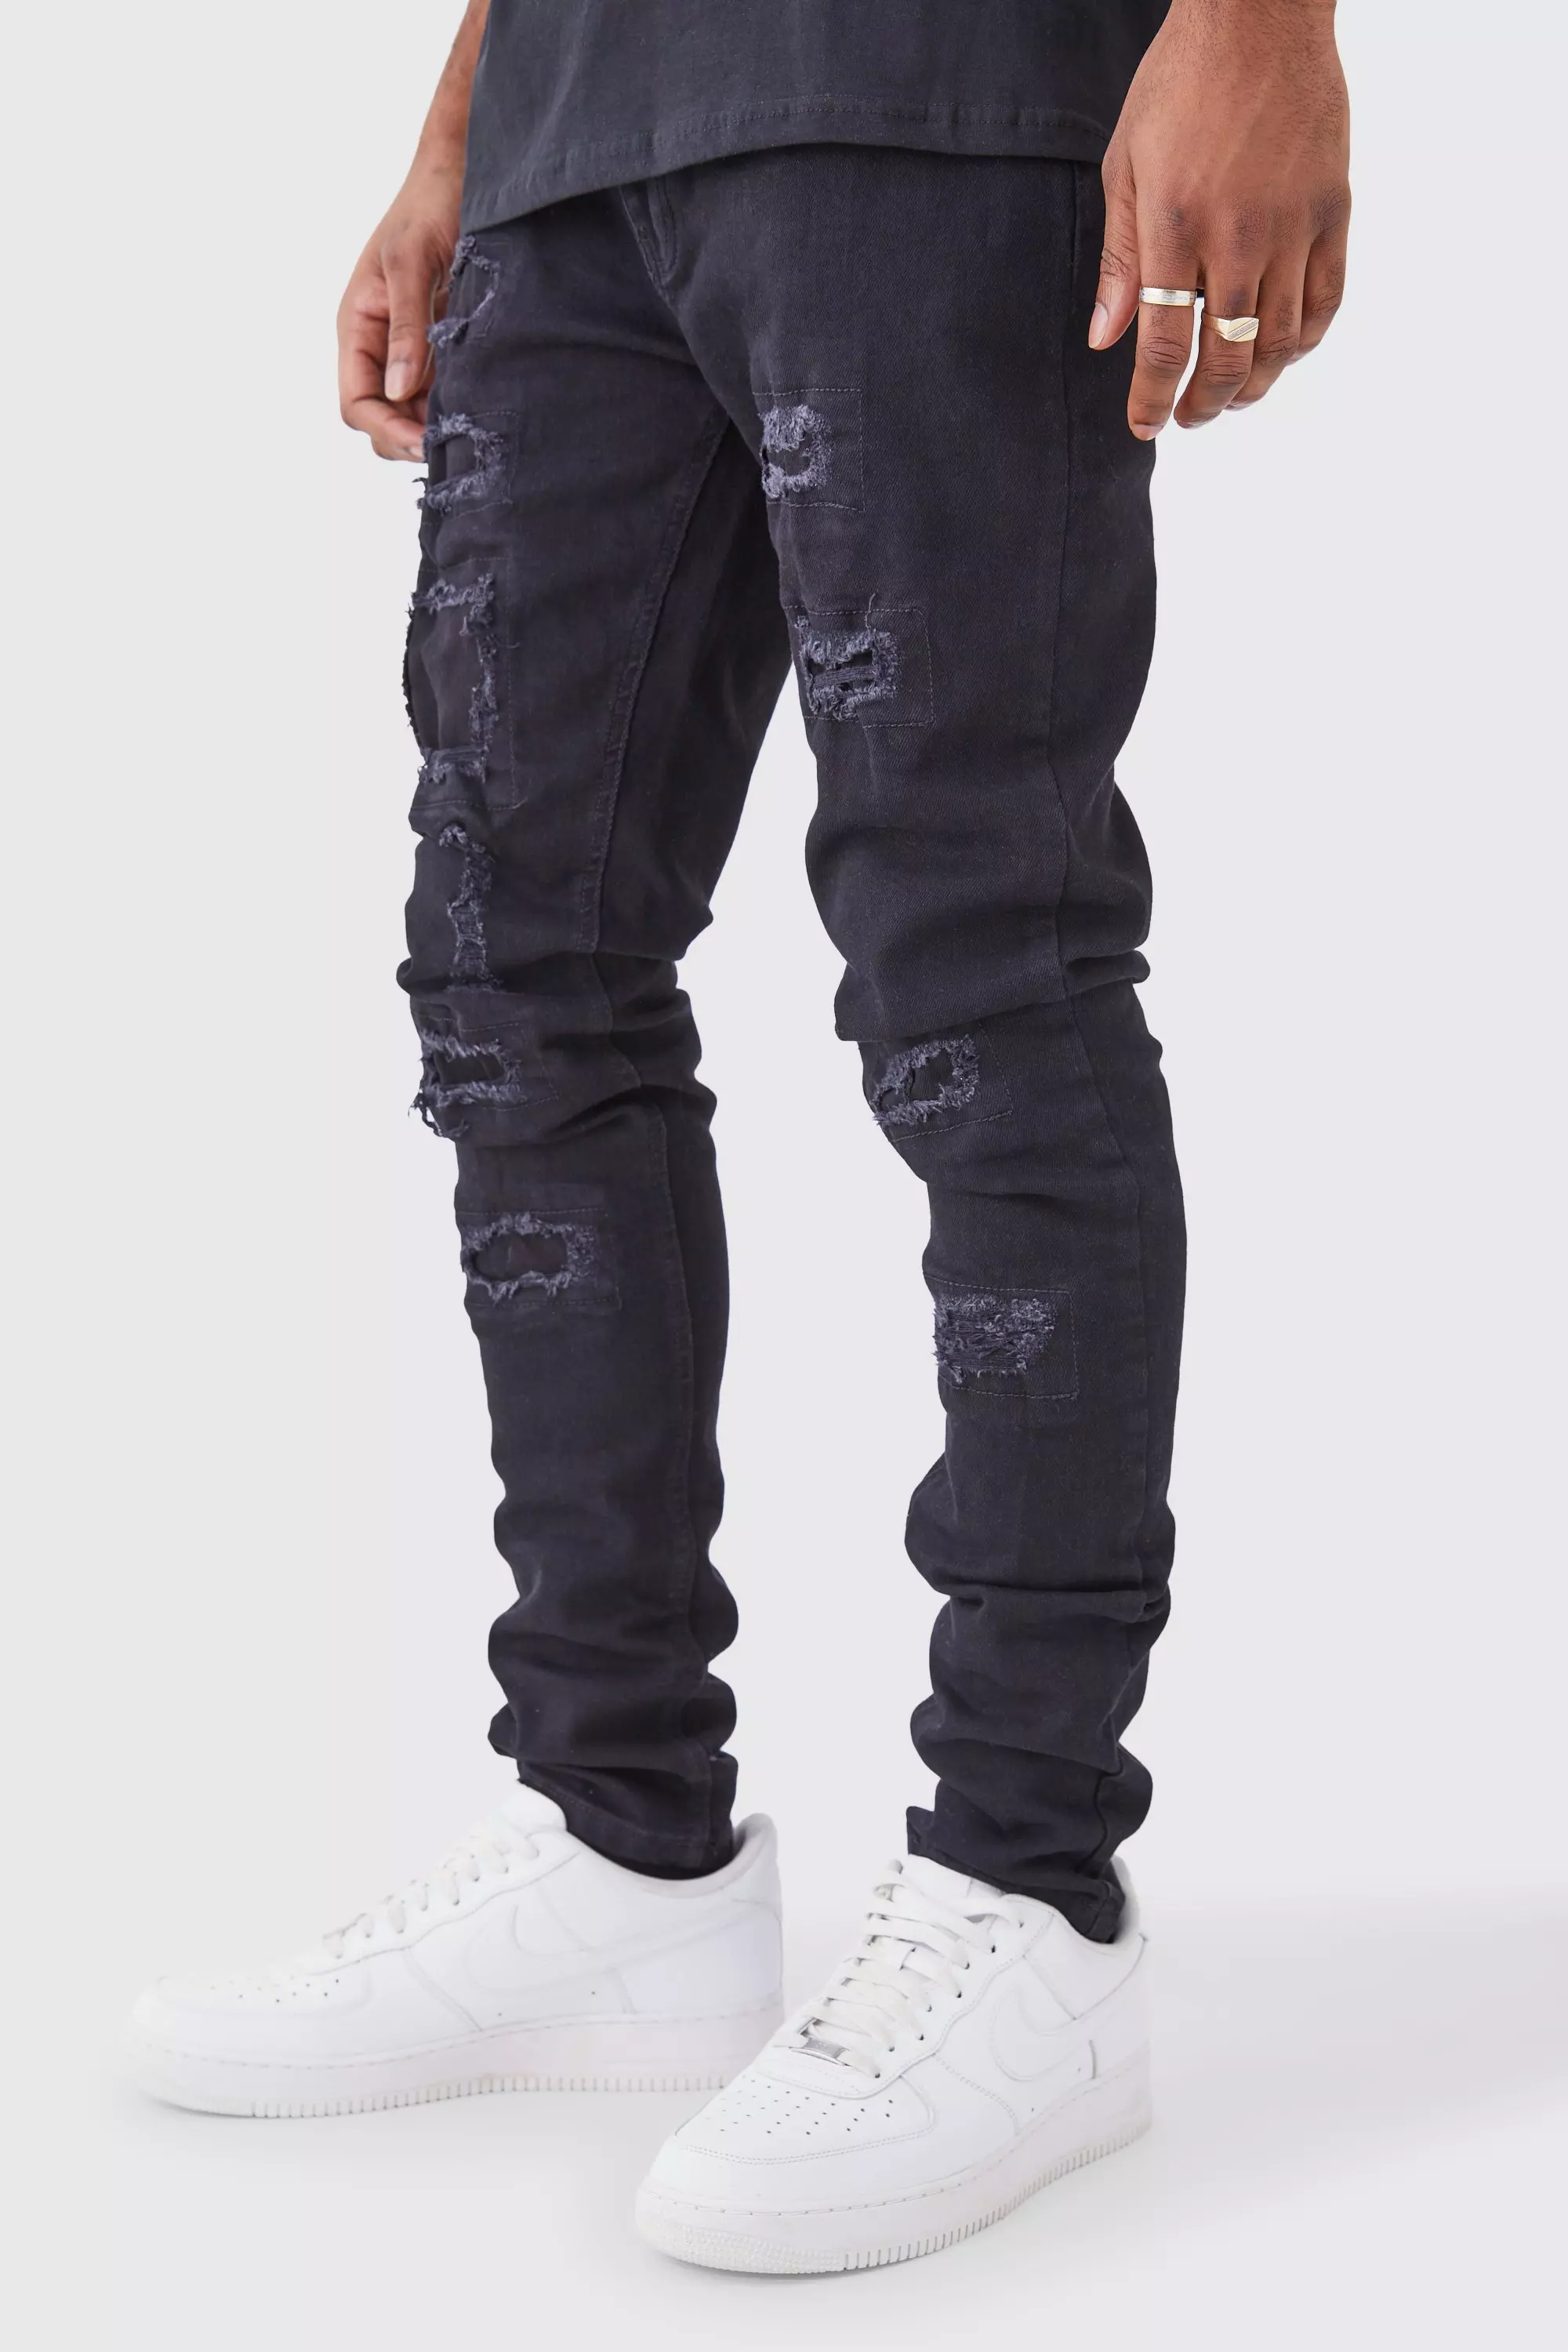 Tall Skinny Stacked Distressed Ripped Jeans True black